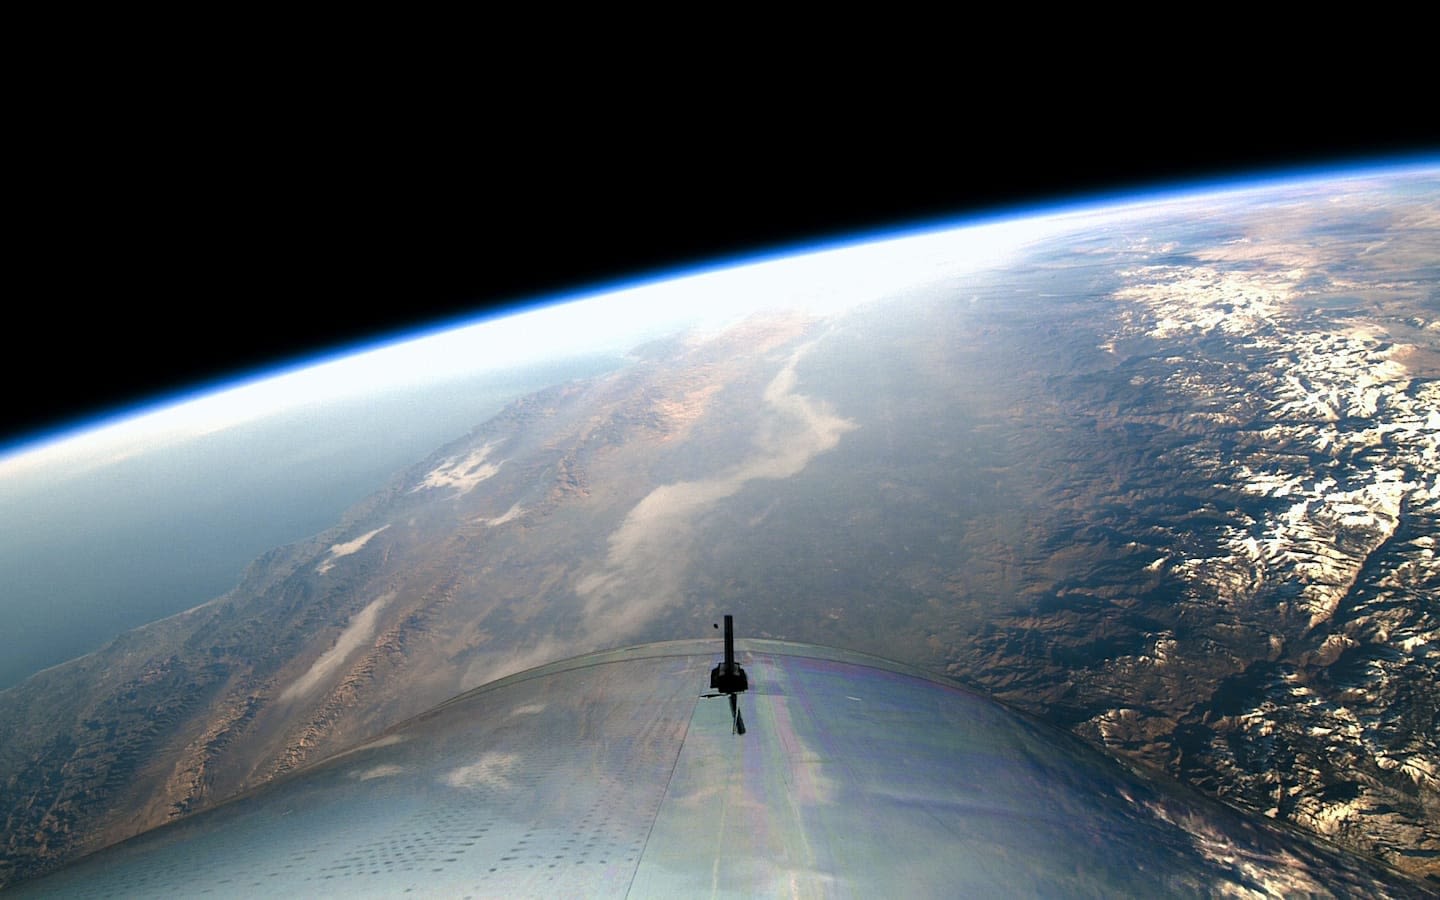 The view from a Virgin Galactic spaceship looking down on earth 